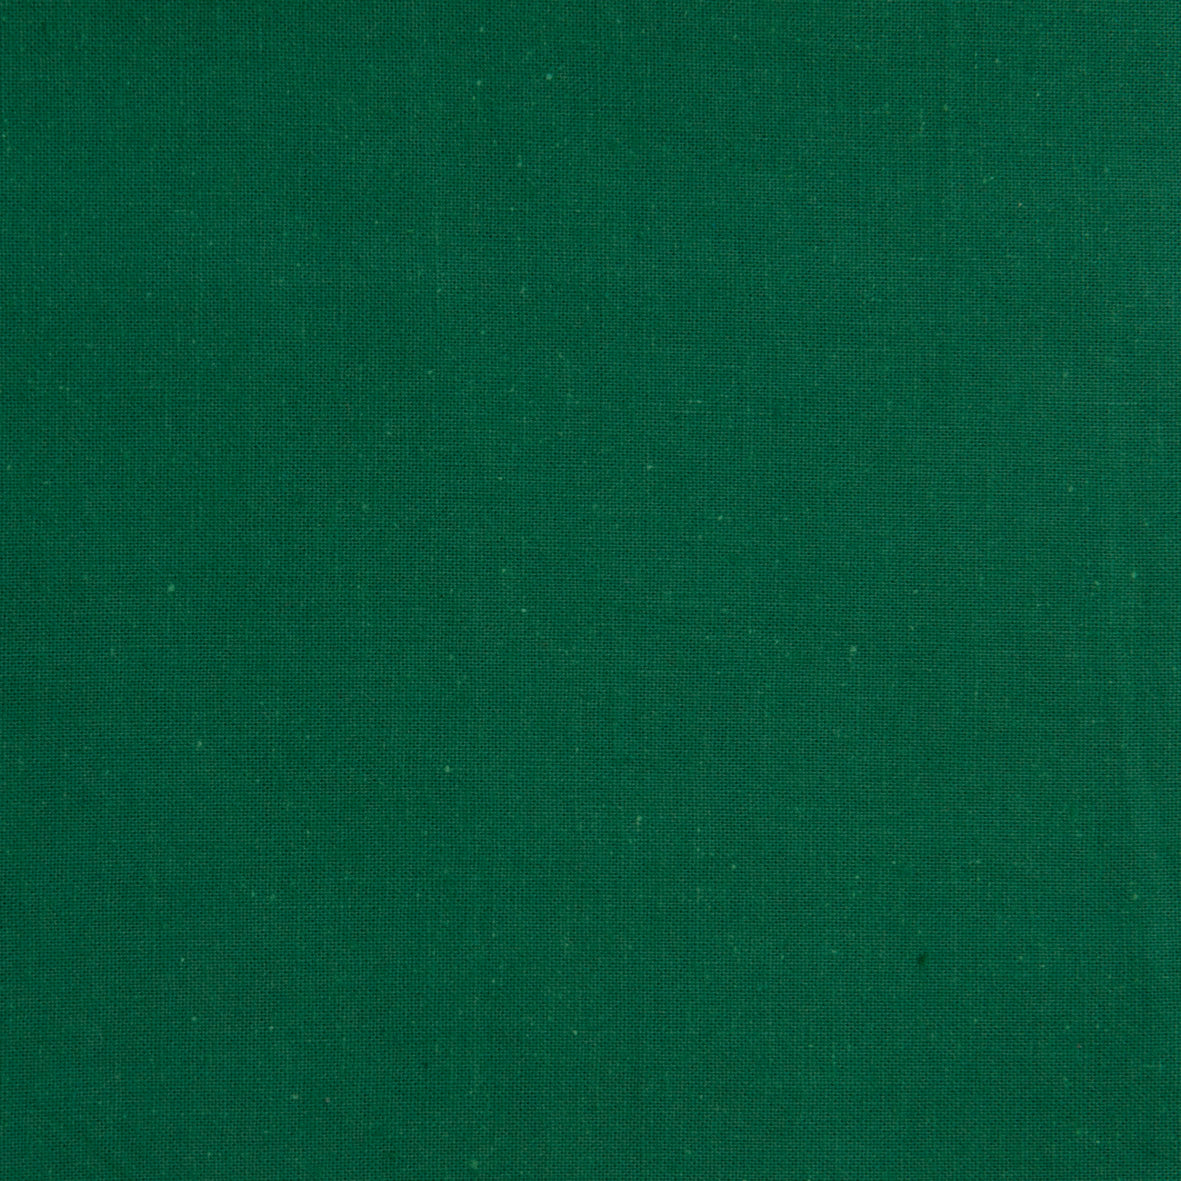 Buy Green Plain Linen Cotton Fabric for Best Price, Reviews, Free